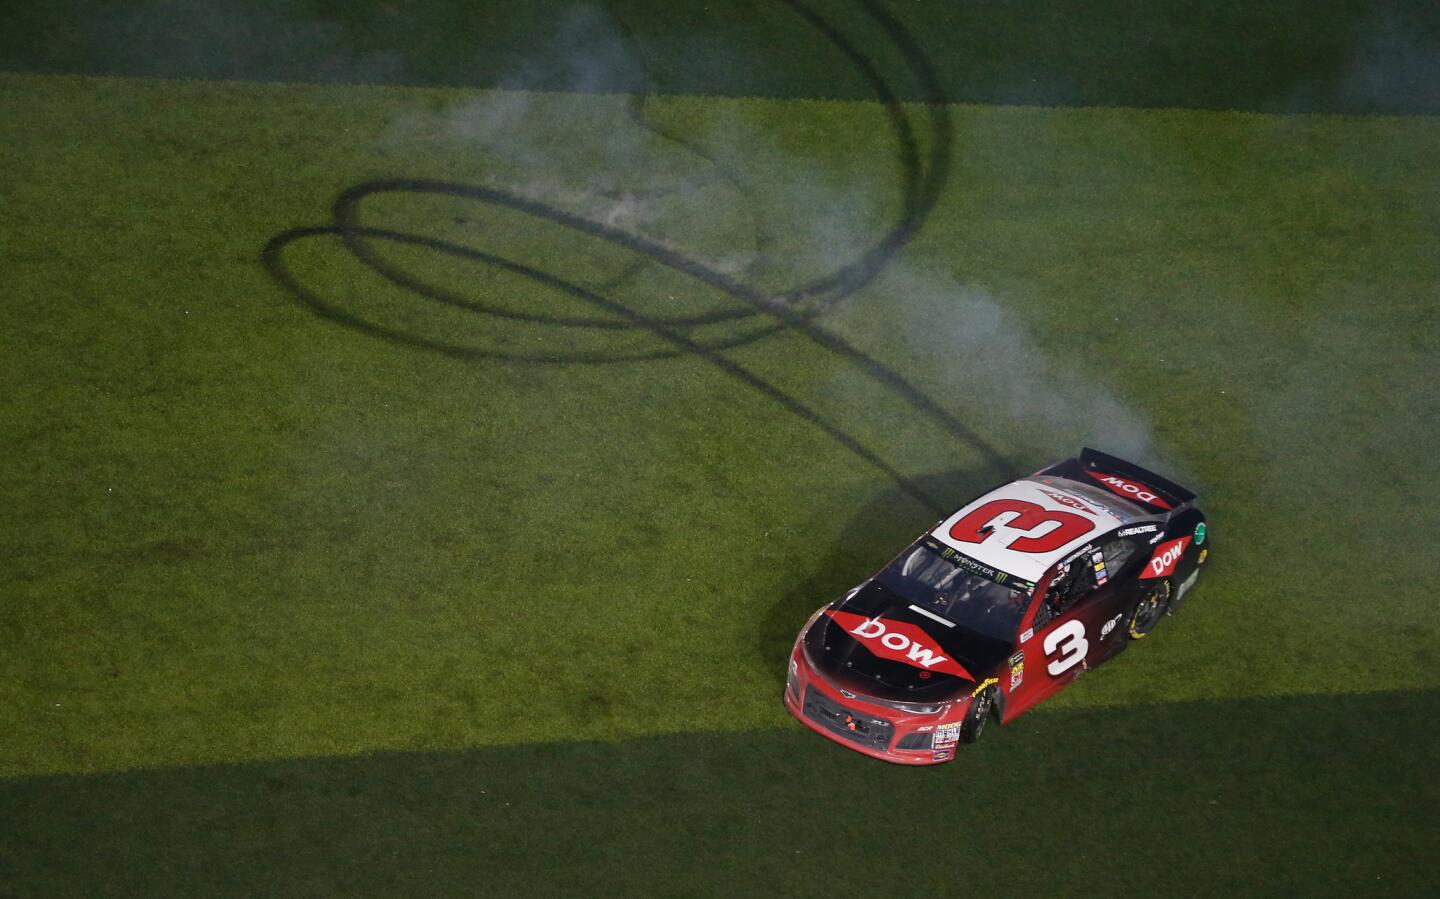 DAYTONA BEACH, FL - FEBRUARY 18: Austin Dillon, driver of the #3 DOW Chevrolet, celebrates with a burnout after winning the Monster Energy NASCAR Cup Series 60th Annual Daytona 500 at Daytona International Speedway on February 18, 2018 in Daytona Beach, Florida. (Photo by Brian Lawdermilk/Getty Images) ** OUTS - ELSENT, FPG, CM - OUTS * NM, PH, VA if sourced by CT, LA or MoD **